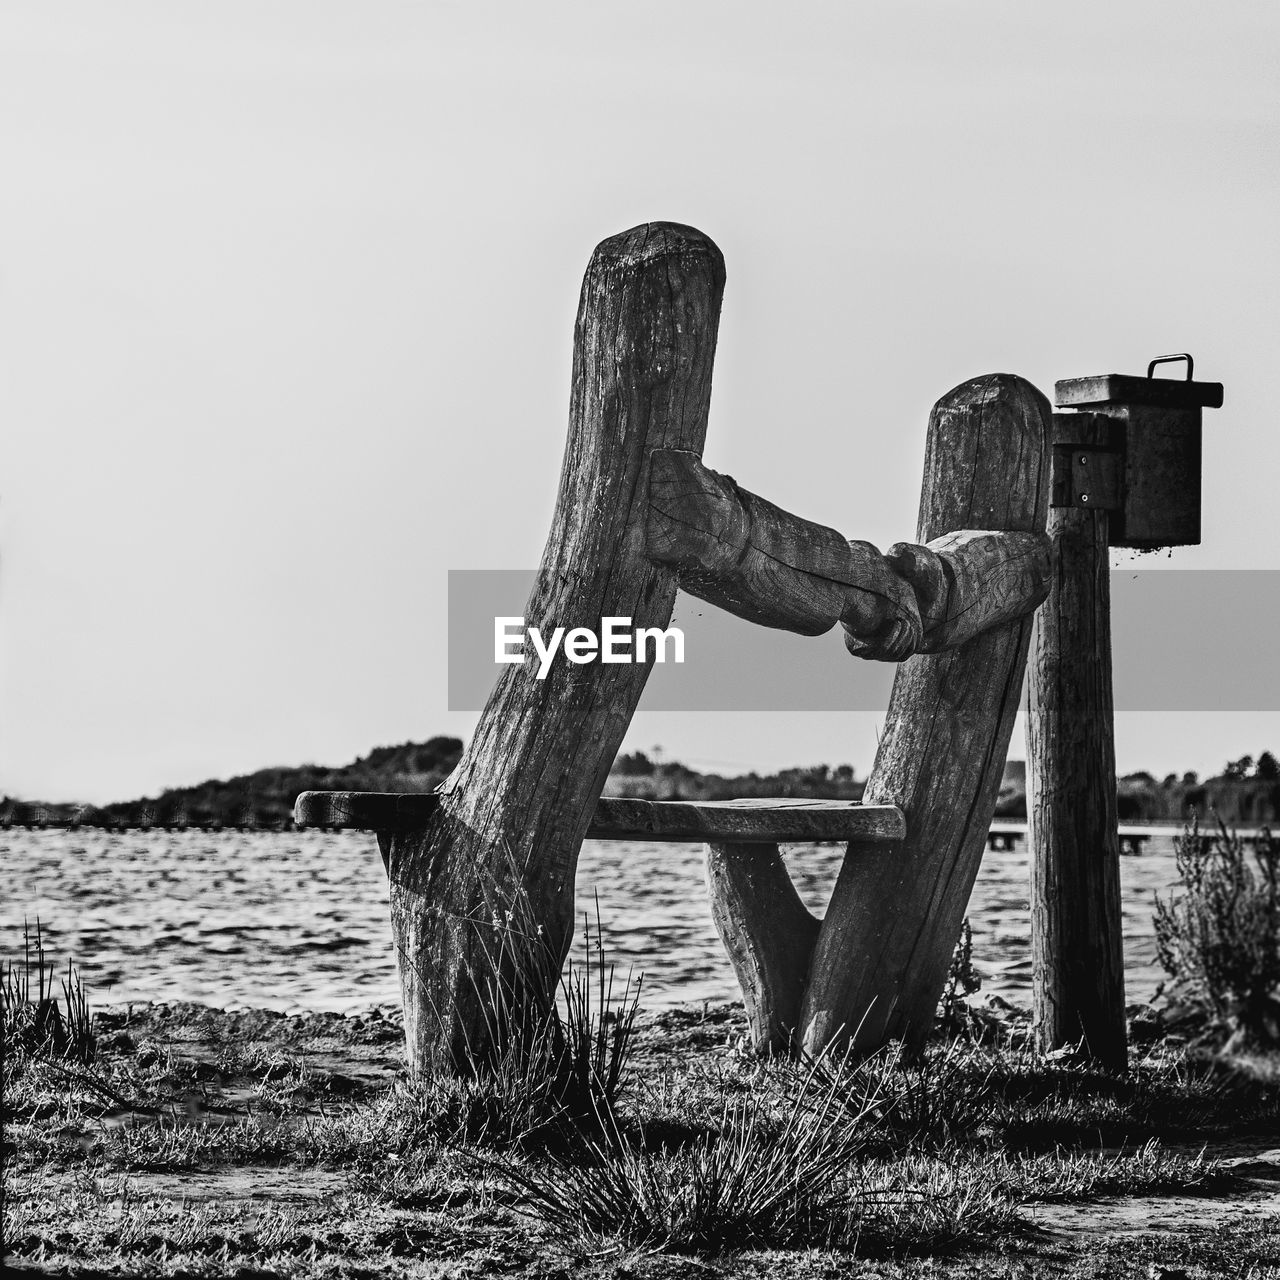 Bench by the lake with attached postbox surrounded by low grass in black and white 